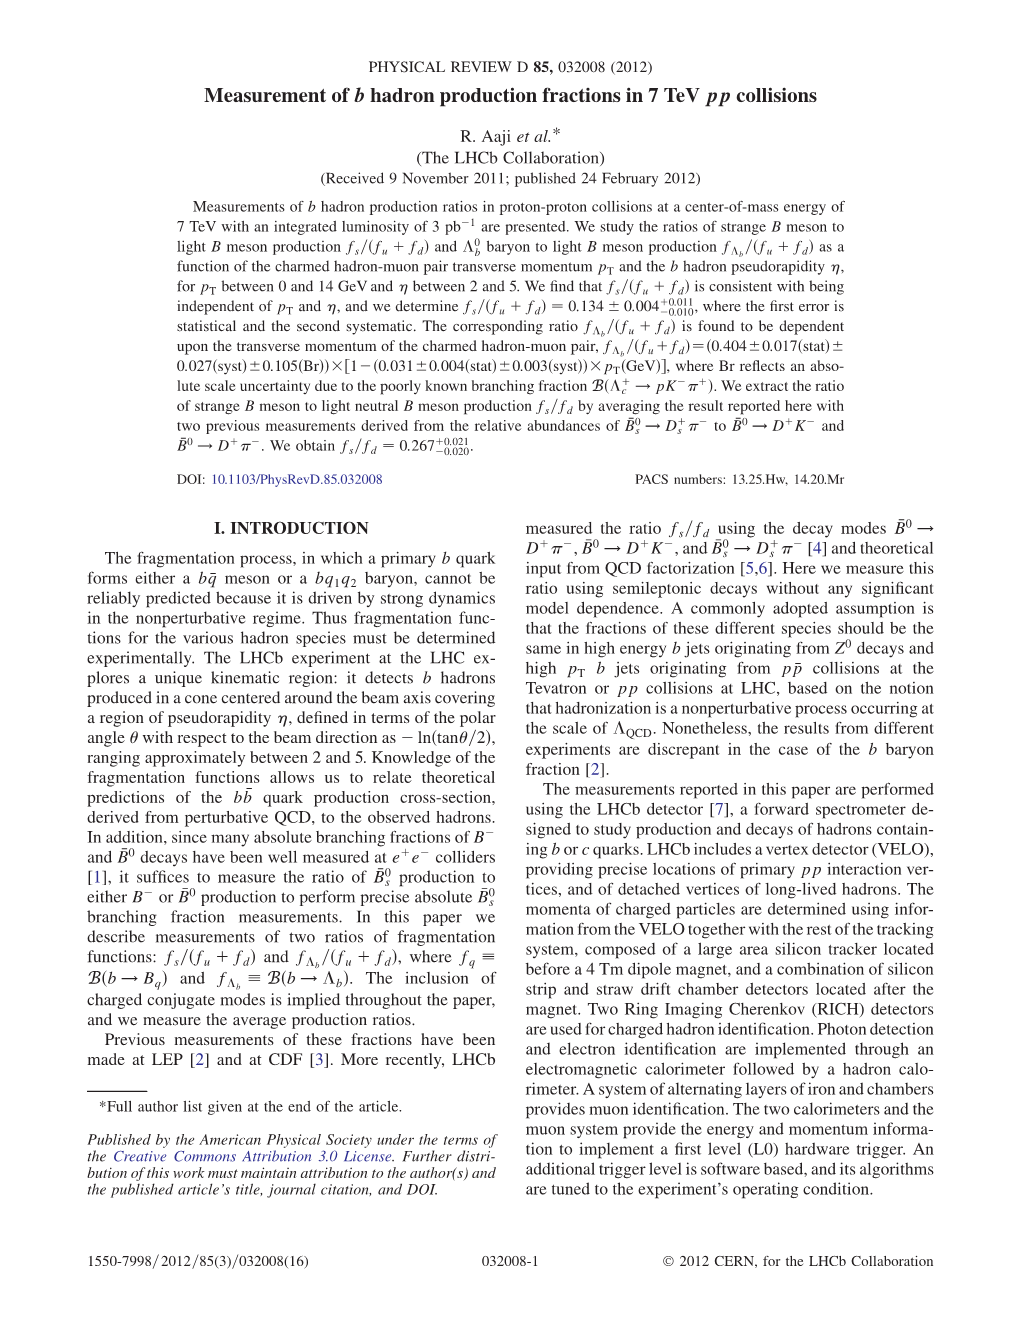 Measurement of B Hadron Production Fractions in 7 Tev Pp Collisions